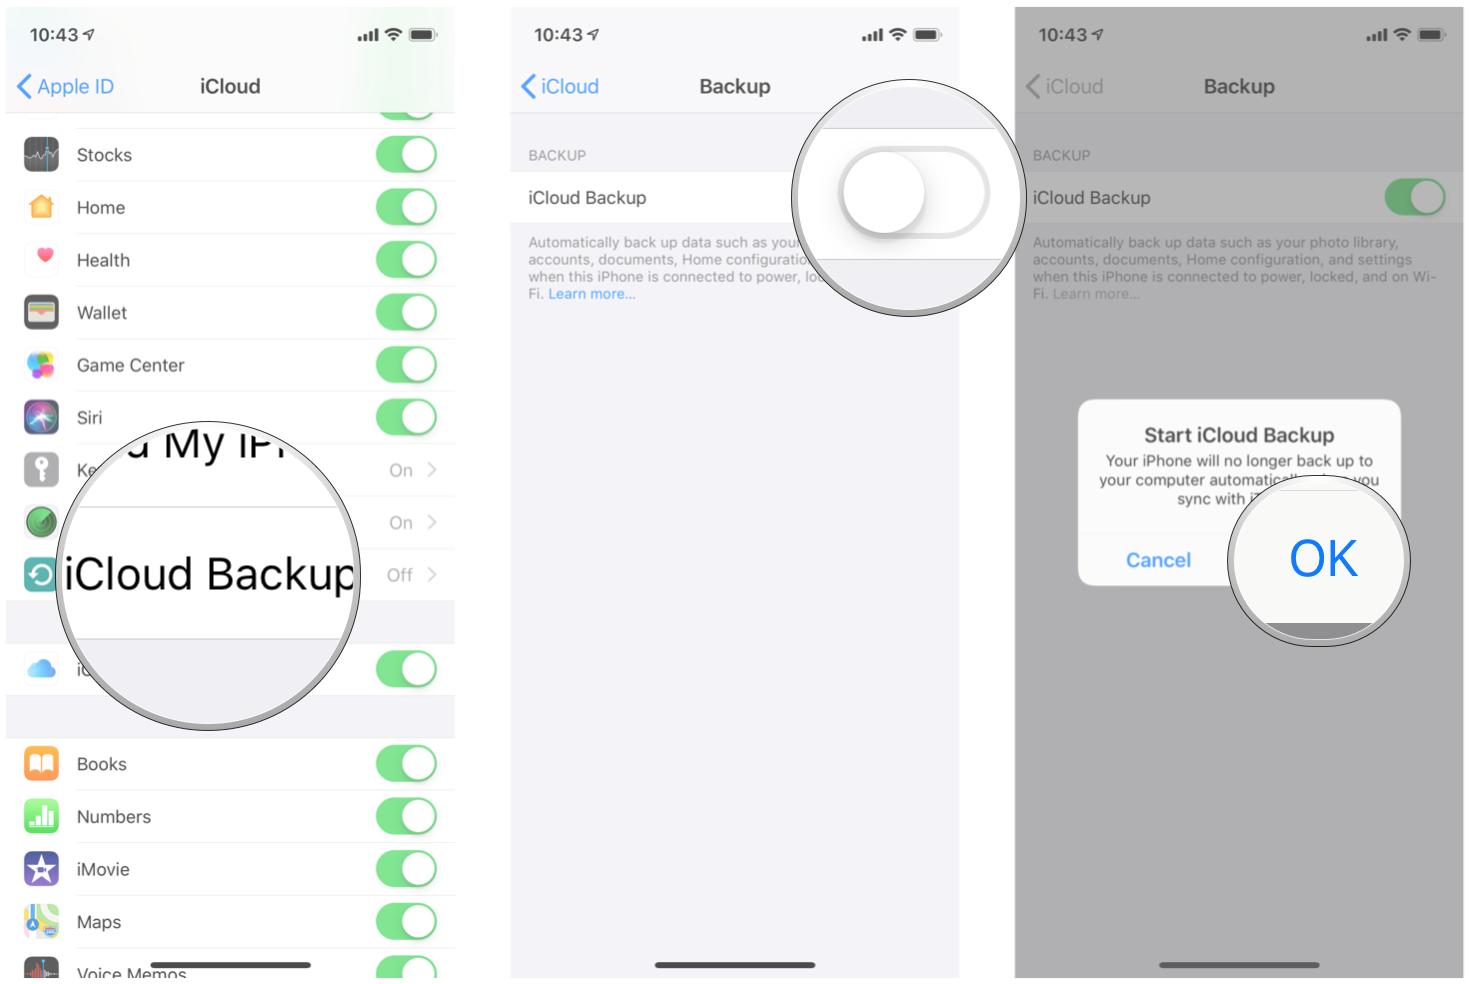 Enable iCloud backup on iPhone and iPad by showing steps: Tap iCloud Backup, tap the toggle to ON, tap OK to confirm